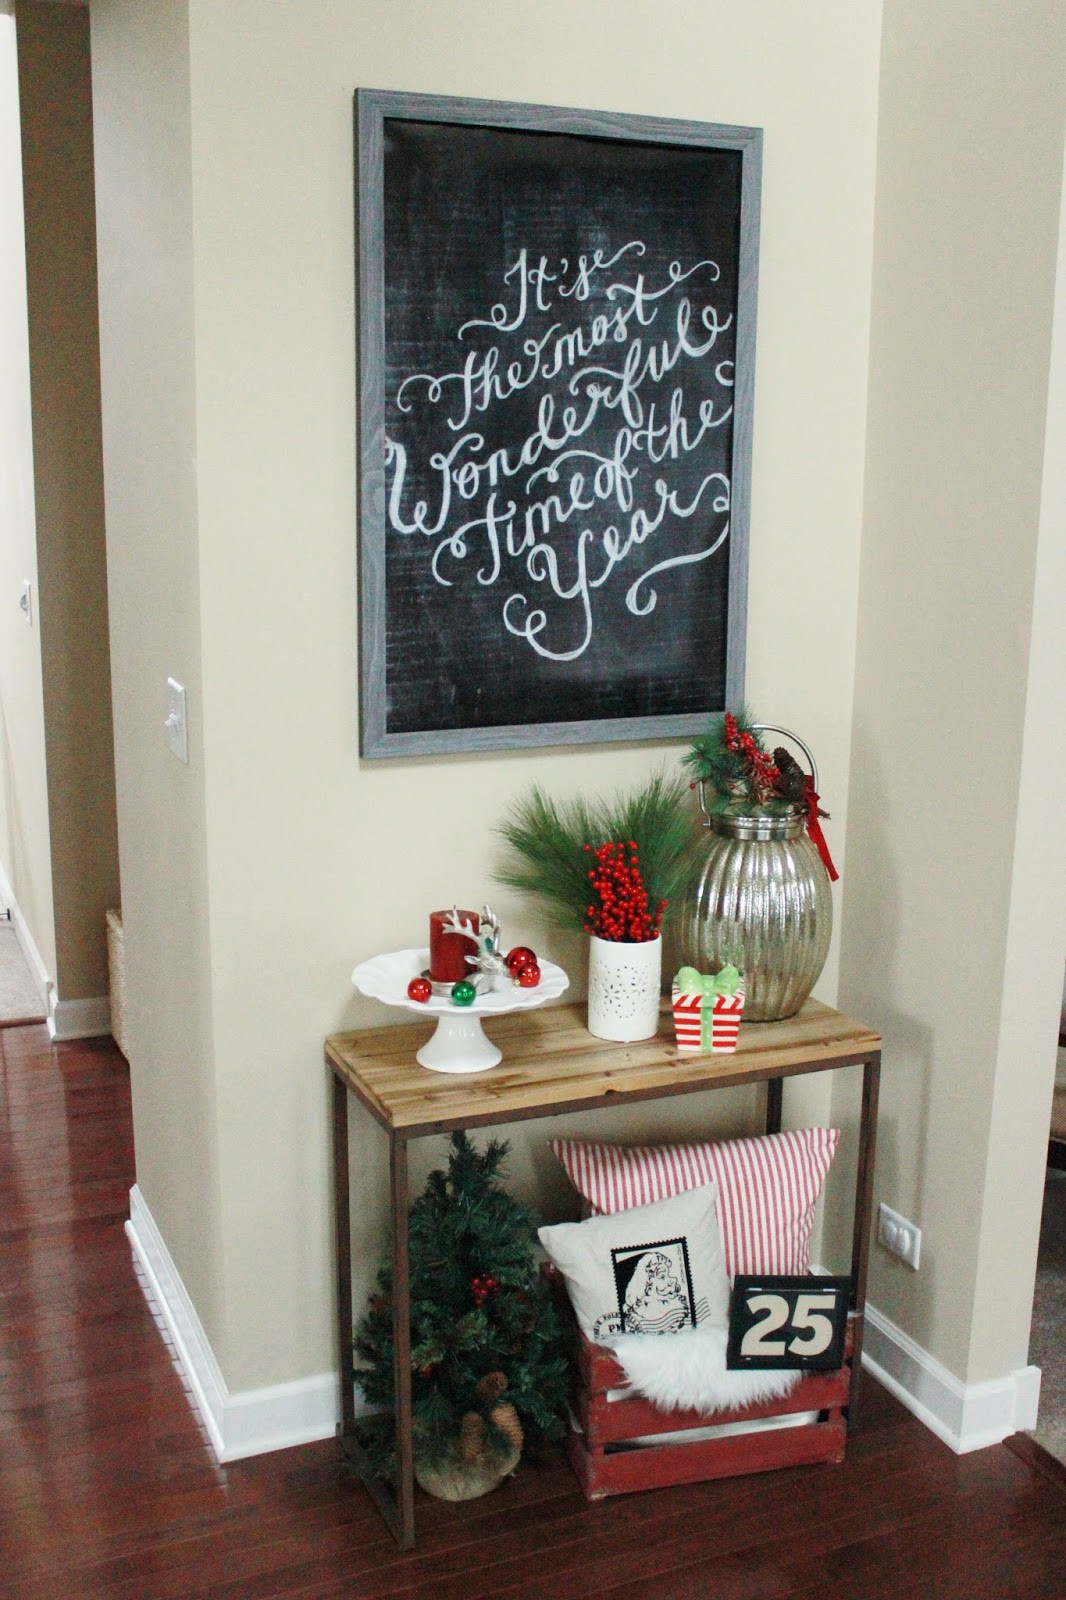 Christmas Entryway Decor
 Our Christmas Entryway Holiday Vignette